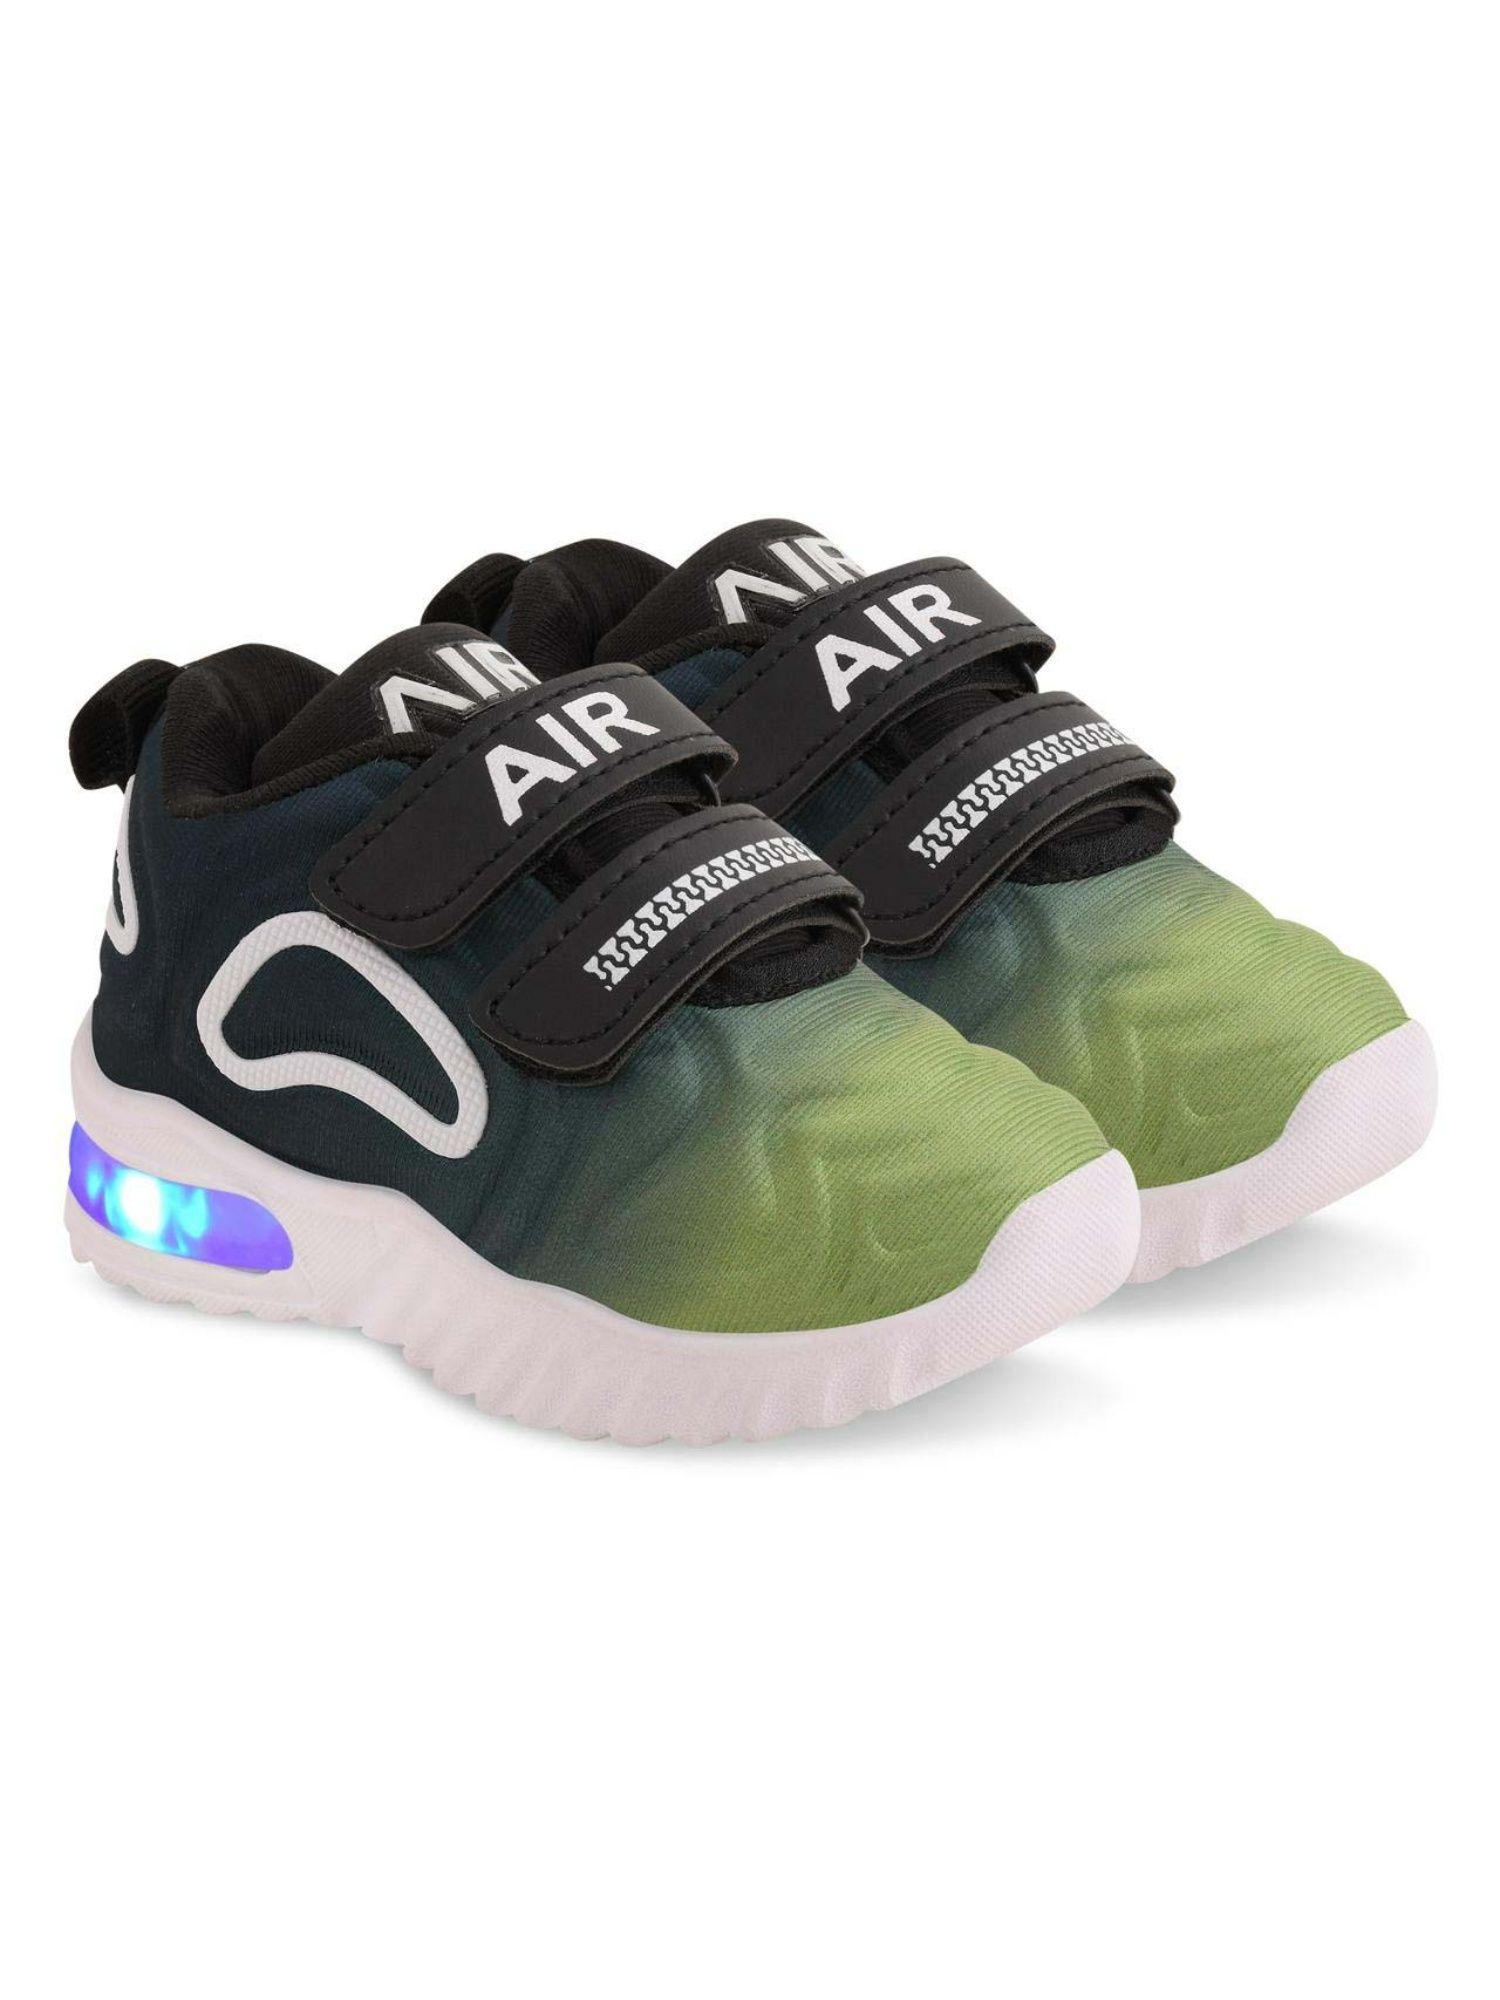 party wear led shoes - green